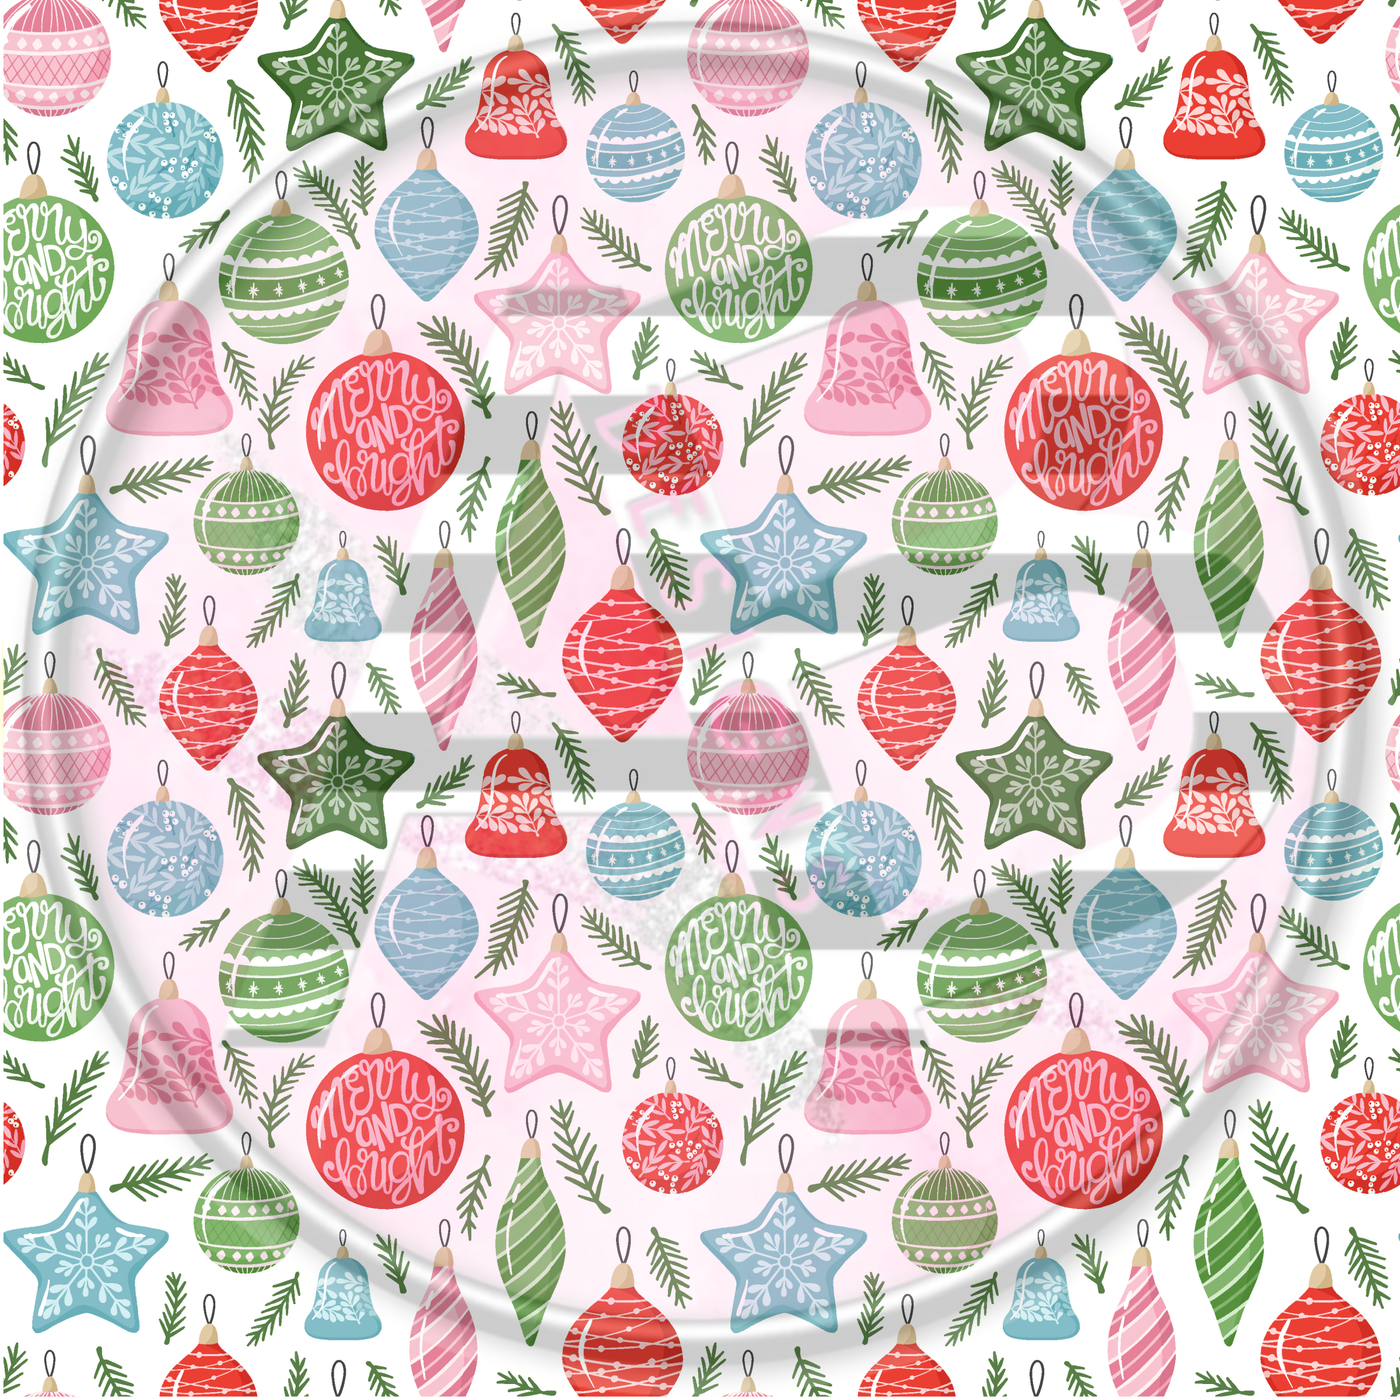 Adhesive Patterned Vinyl - Cozy Christmas 26